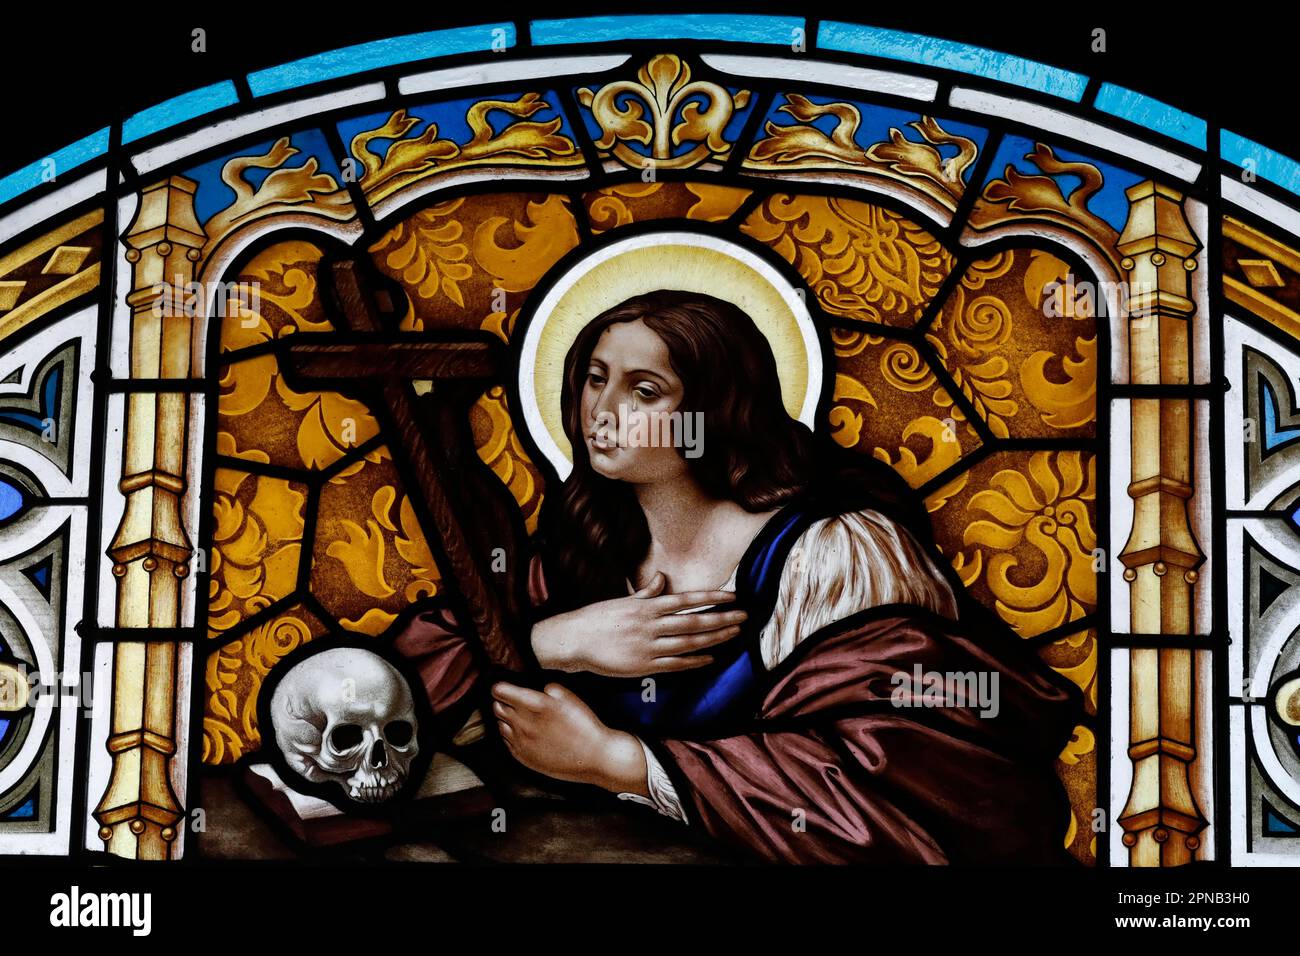 Thi Nghe Church. Stained glass.  Mary of Magdala. The Penitent Mary of Magdala. Ho Chi Minh City. Vietnam. Stock Photo